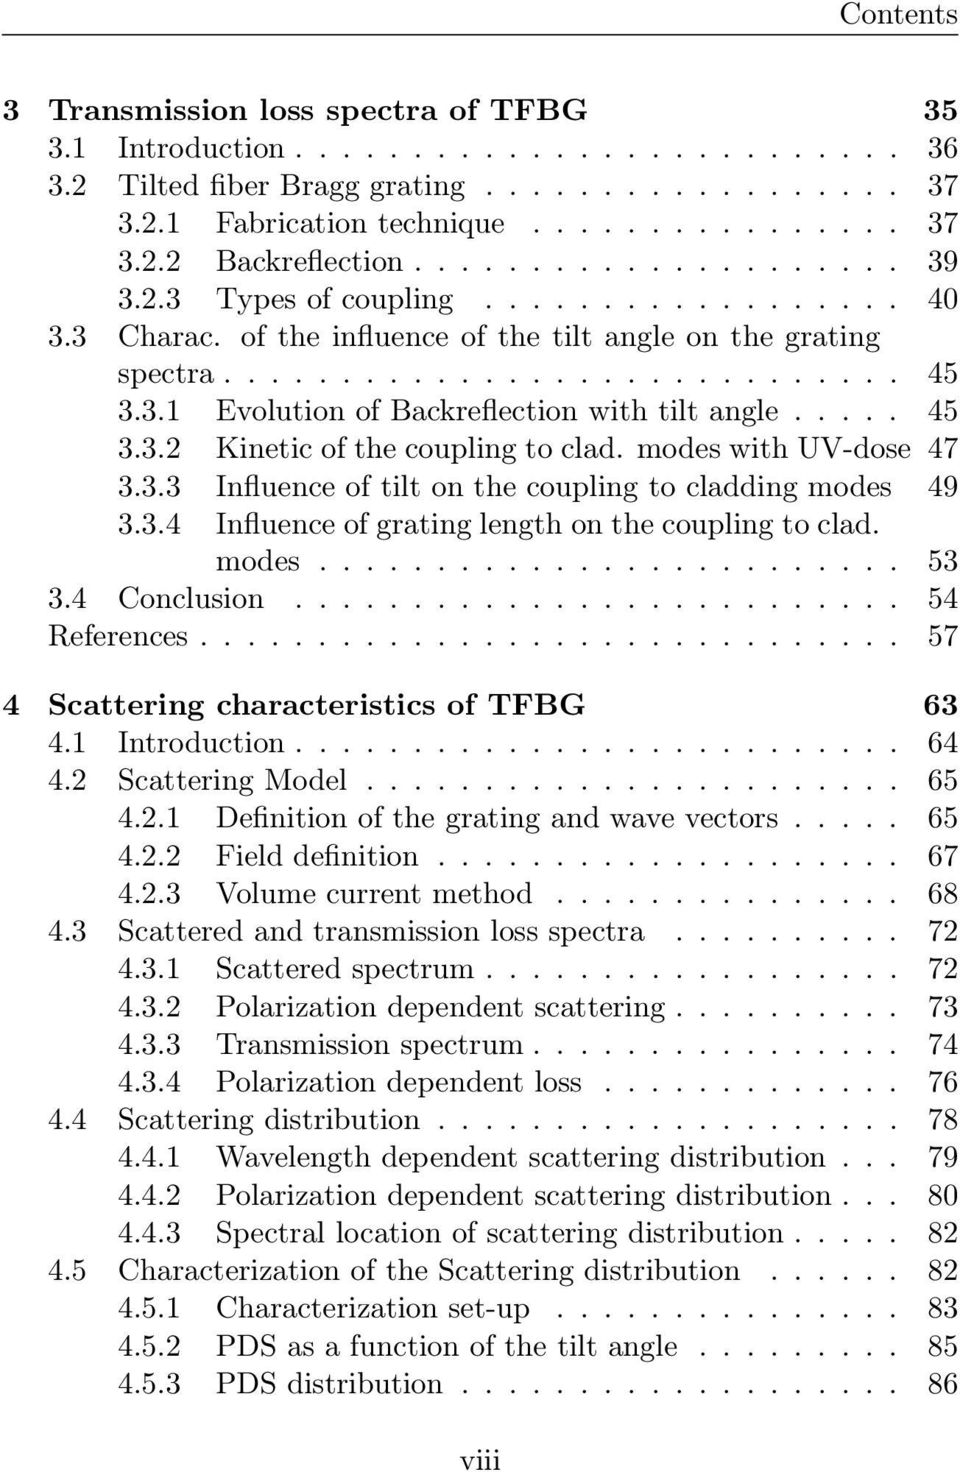 3.4 Influence of grating length on the coupling to clad. modes... 53 3.4 Conclusion... 54 References... 57 4 Scattering characteristics of TFBG 63 4.1 Introduction... 64 4.2 Scattering Model..... 65 4.